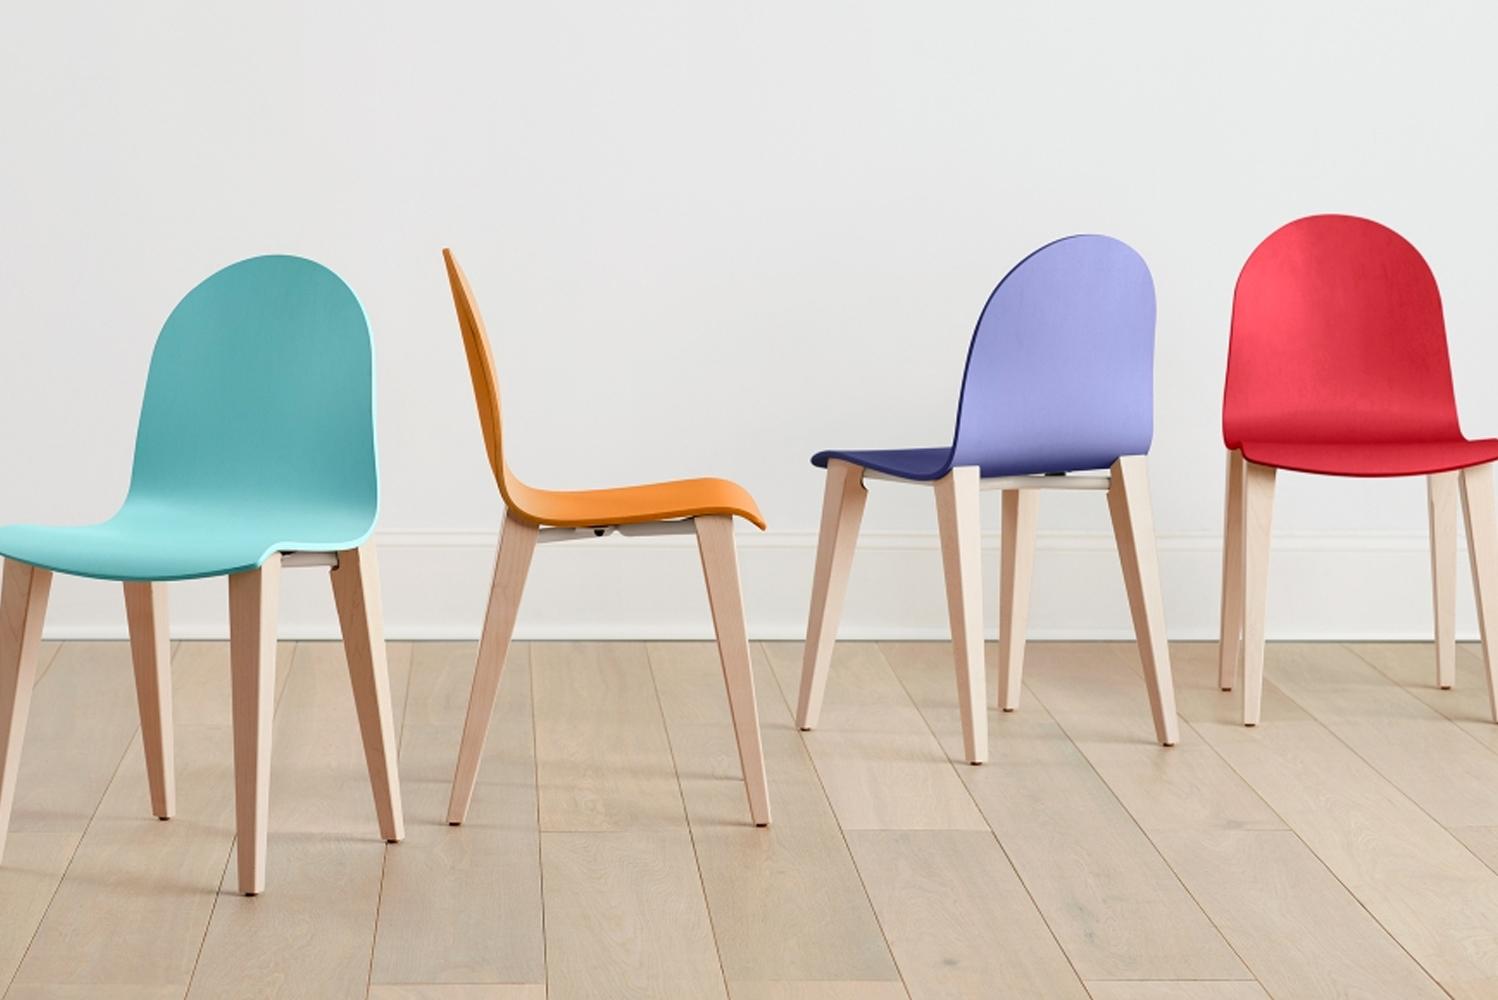 Leland International launched the Quince collection which includes chairs and tables 